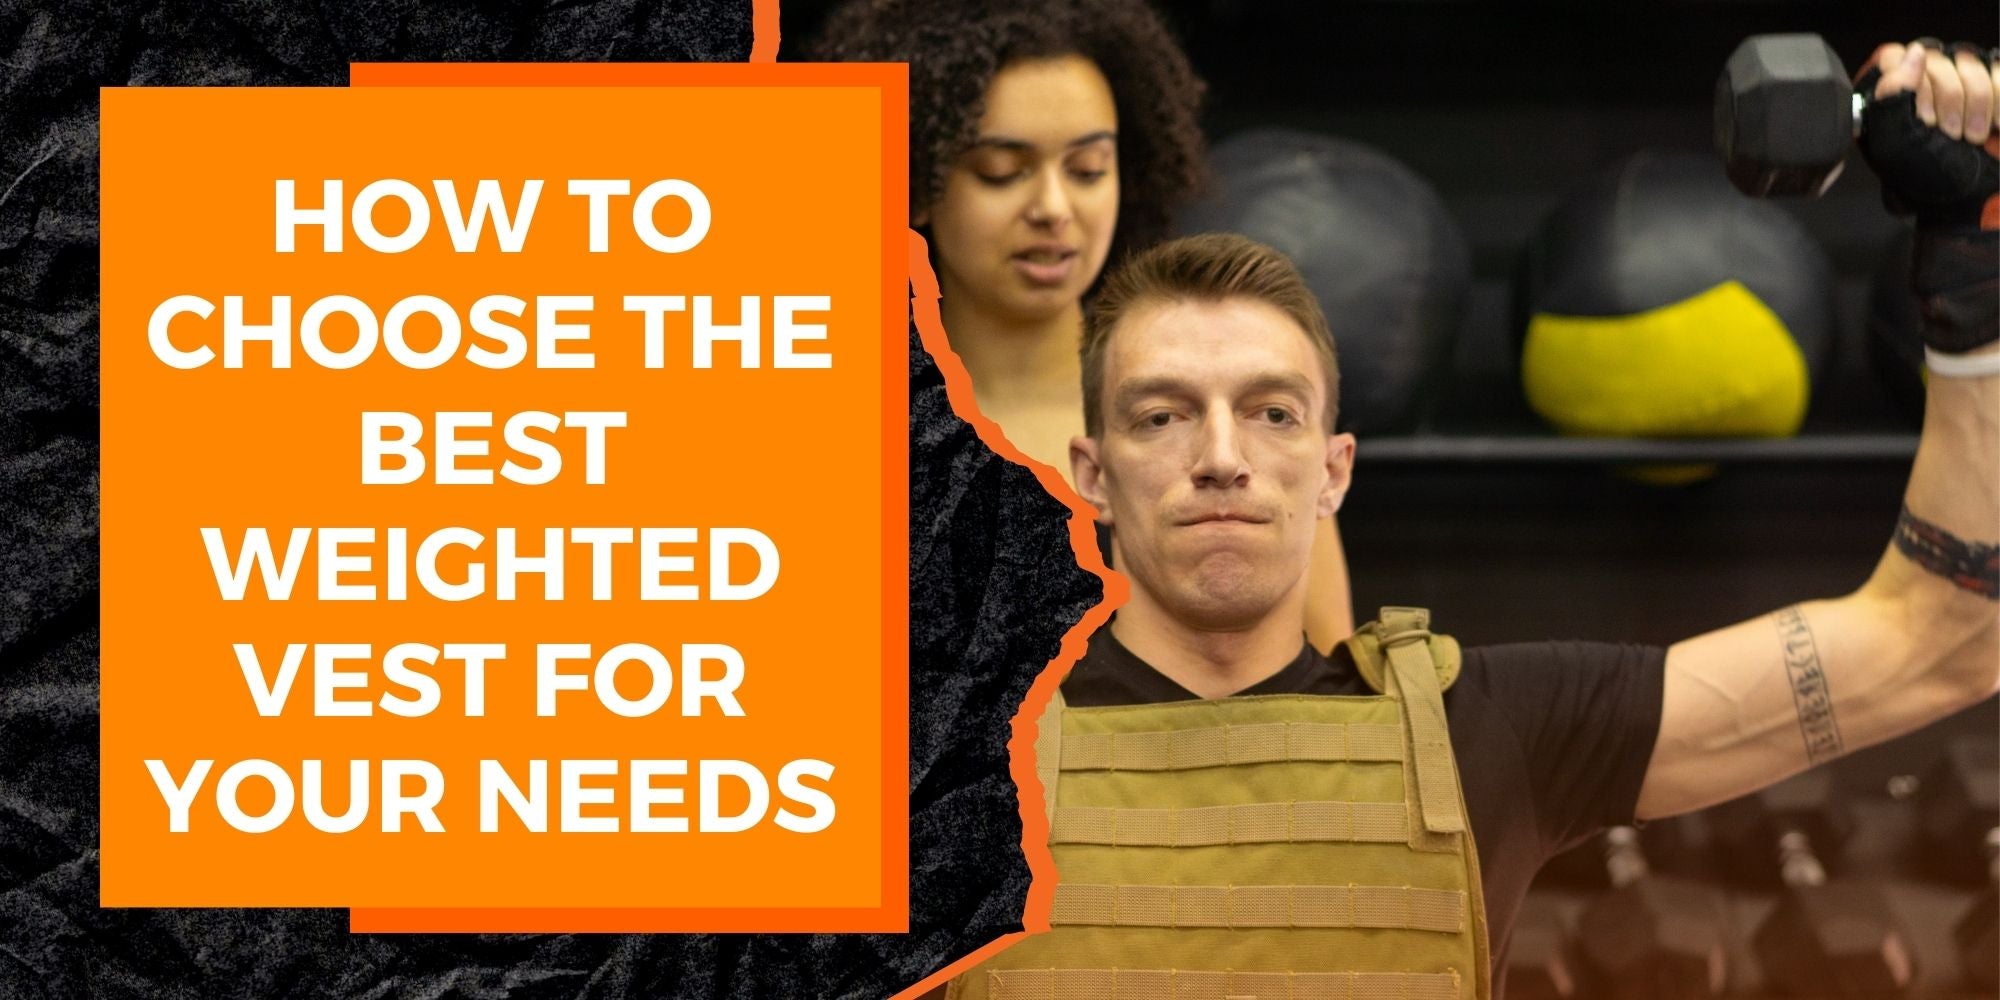 How to Choose the Best Weighted Vest for Your Needs